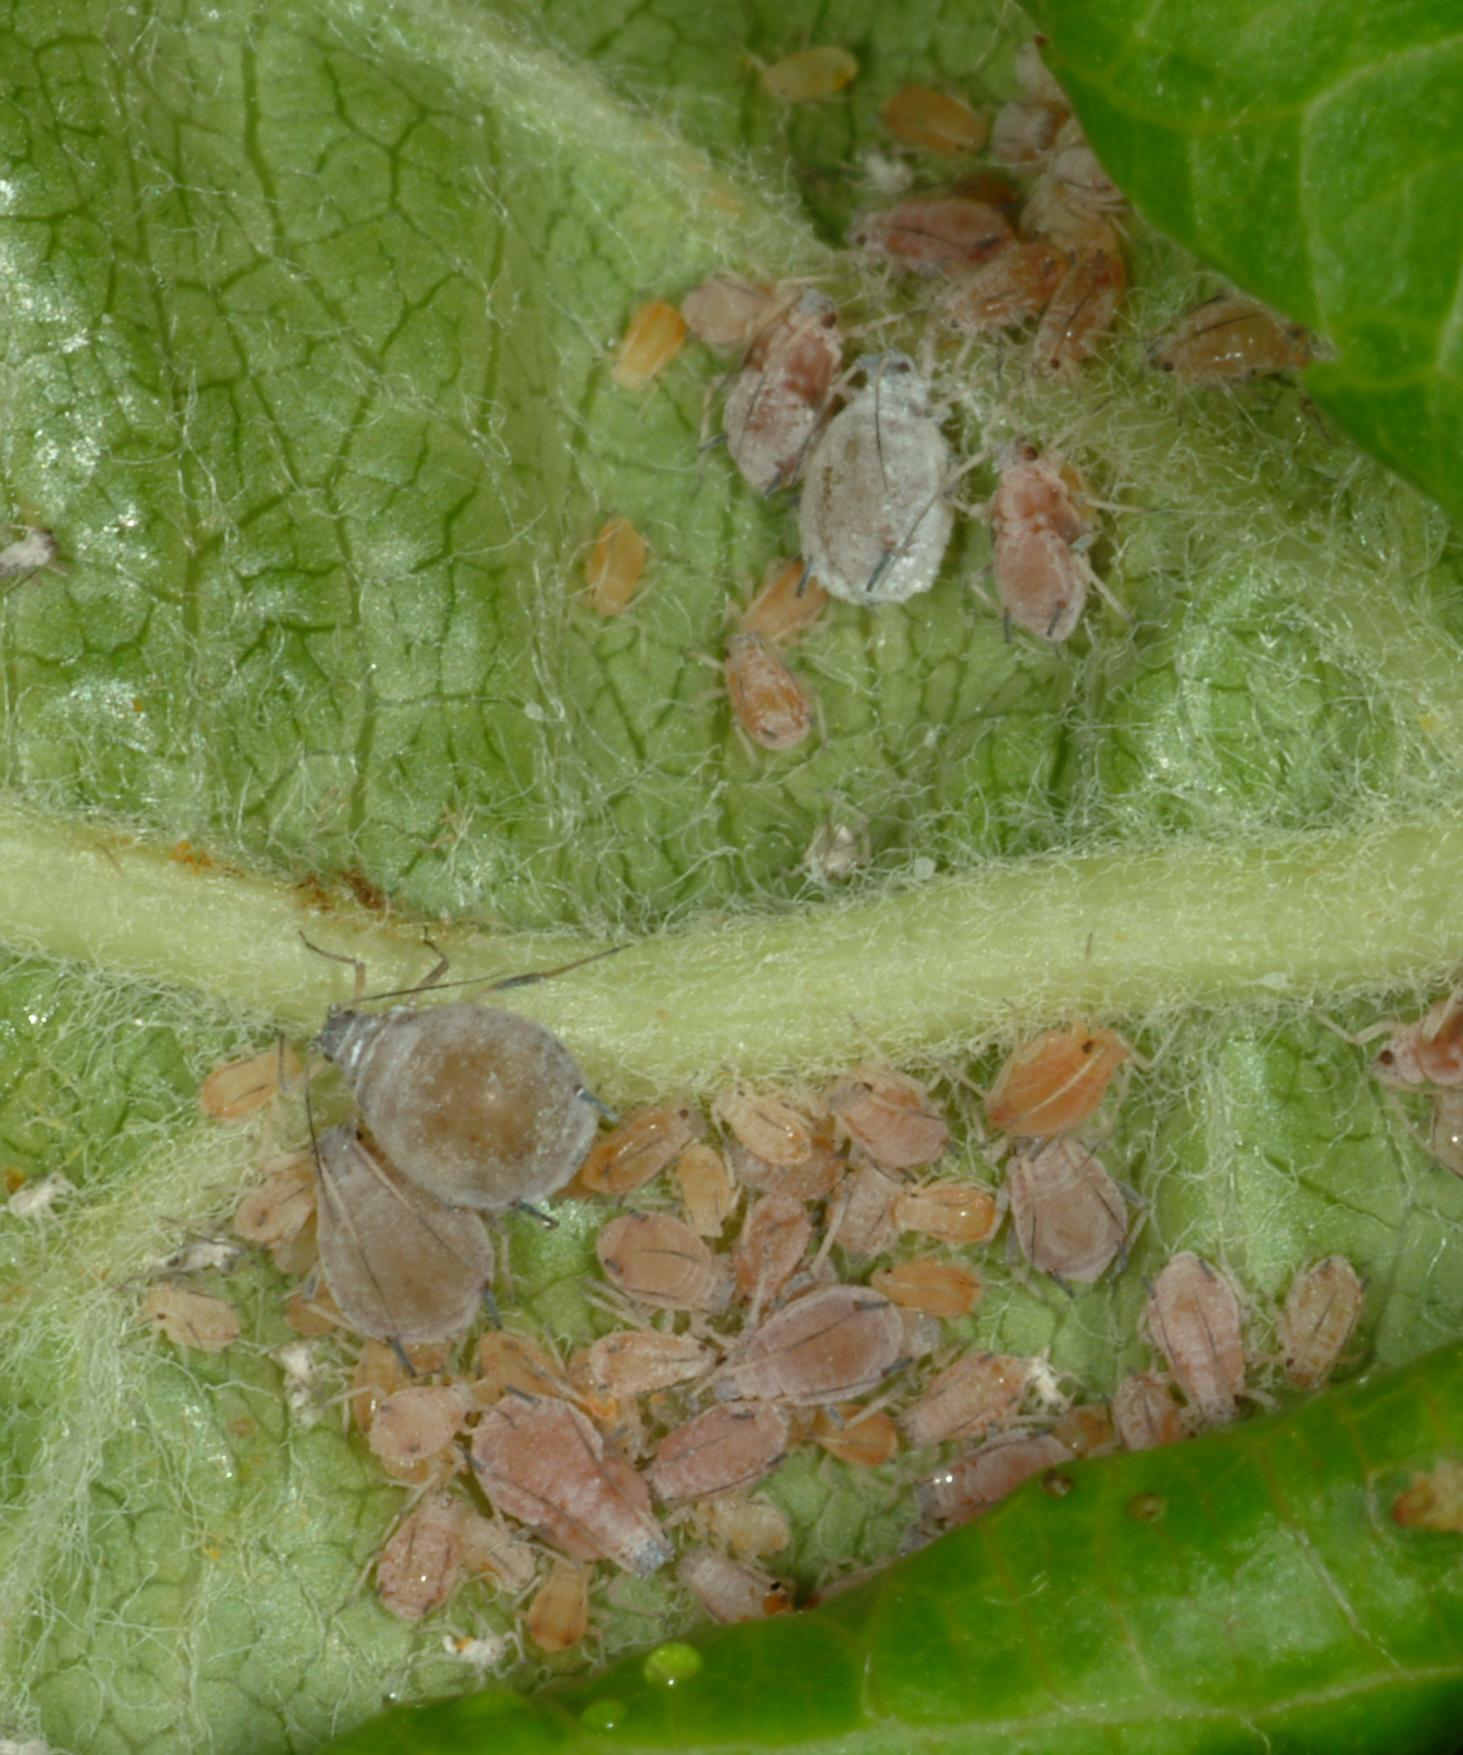 Rosy apple aphid (Bessin, UKY)